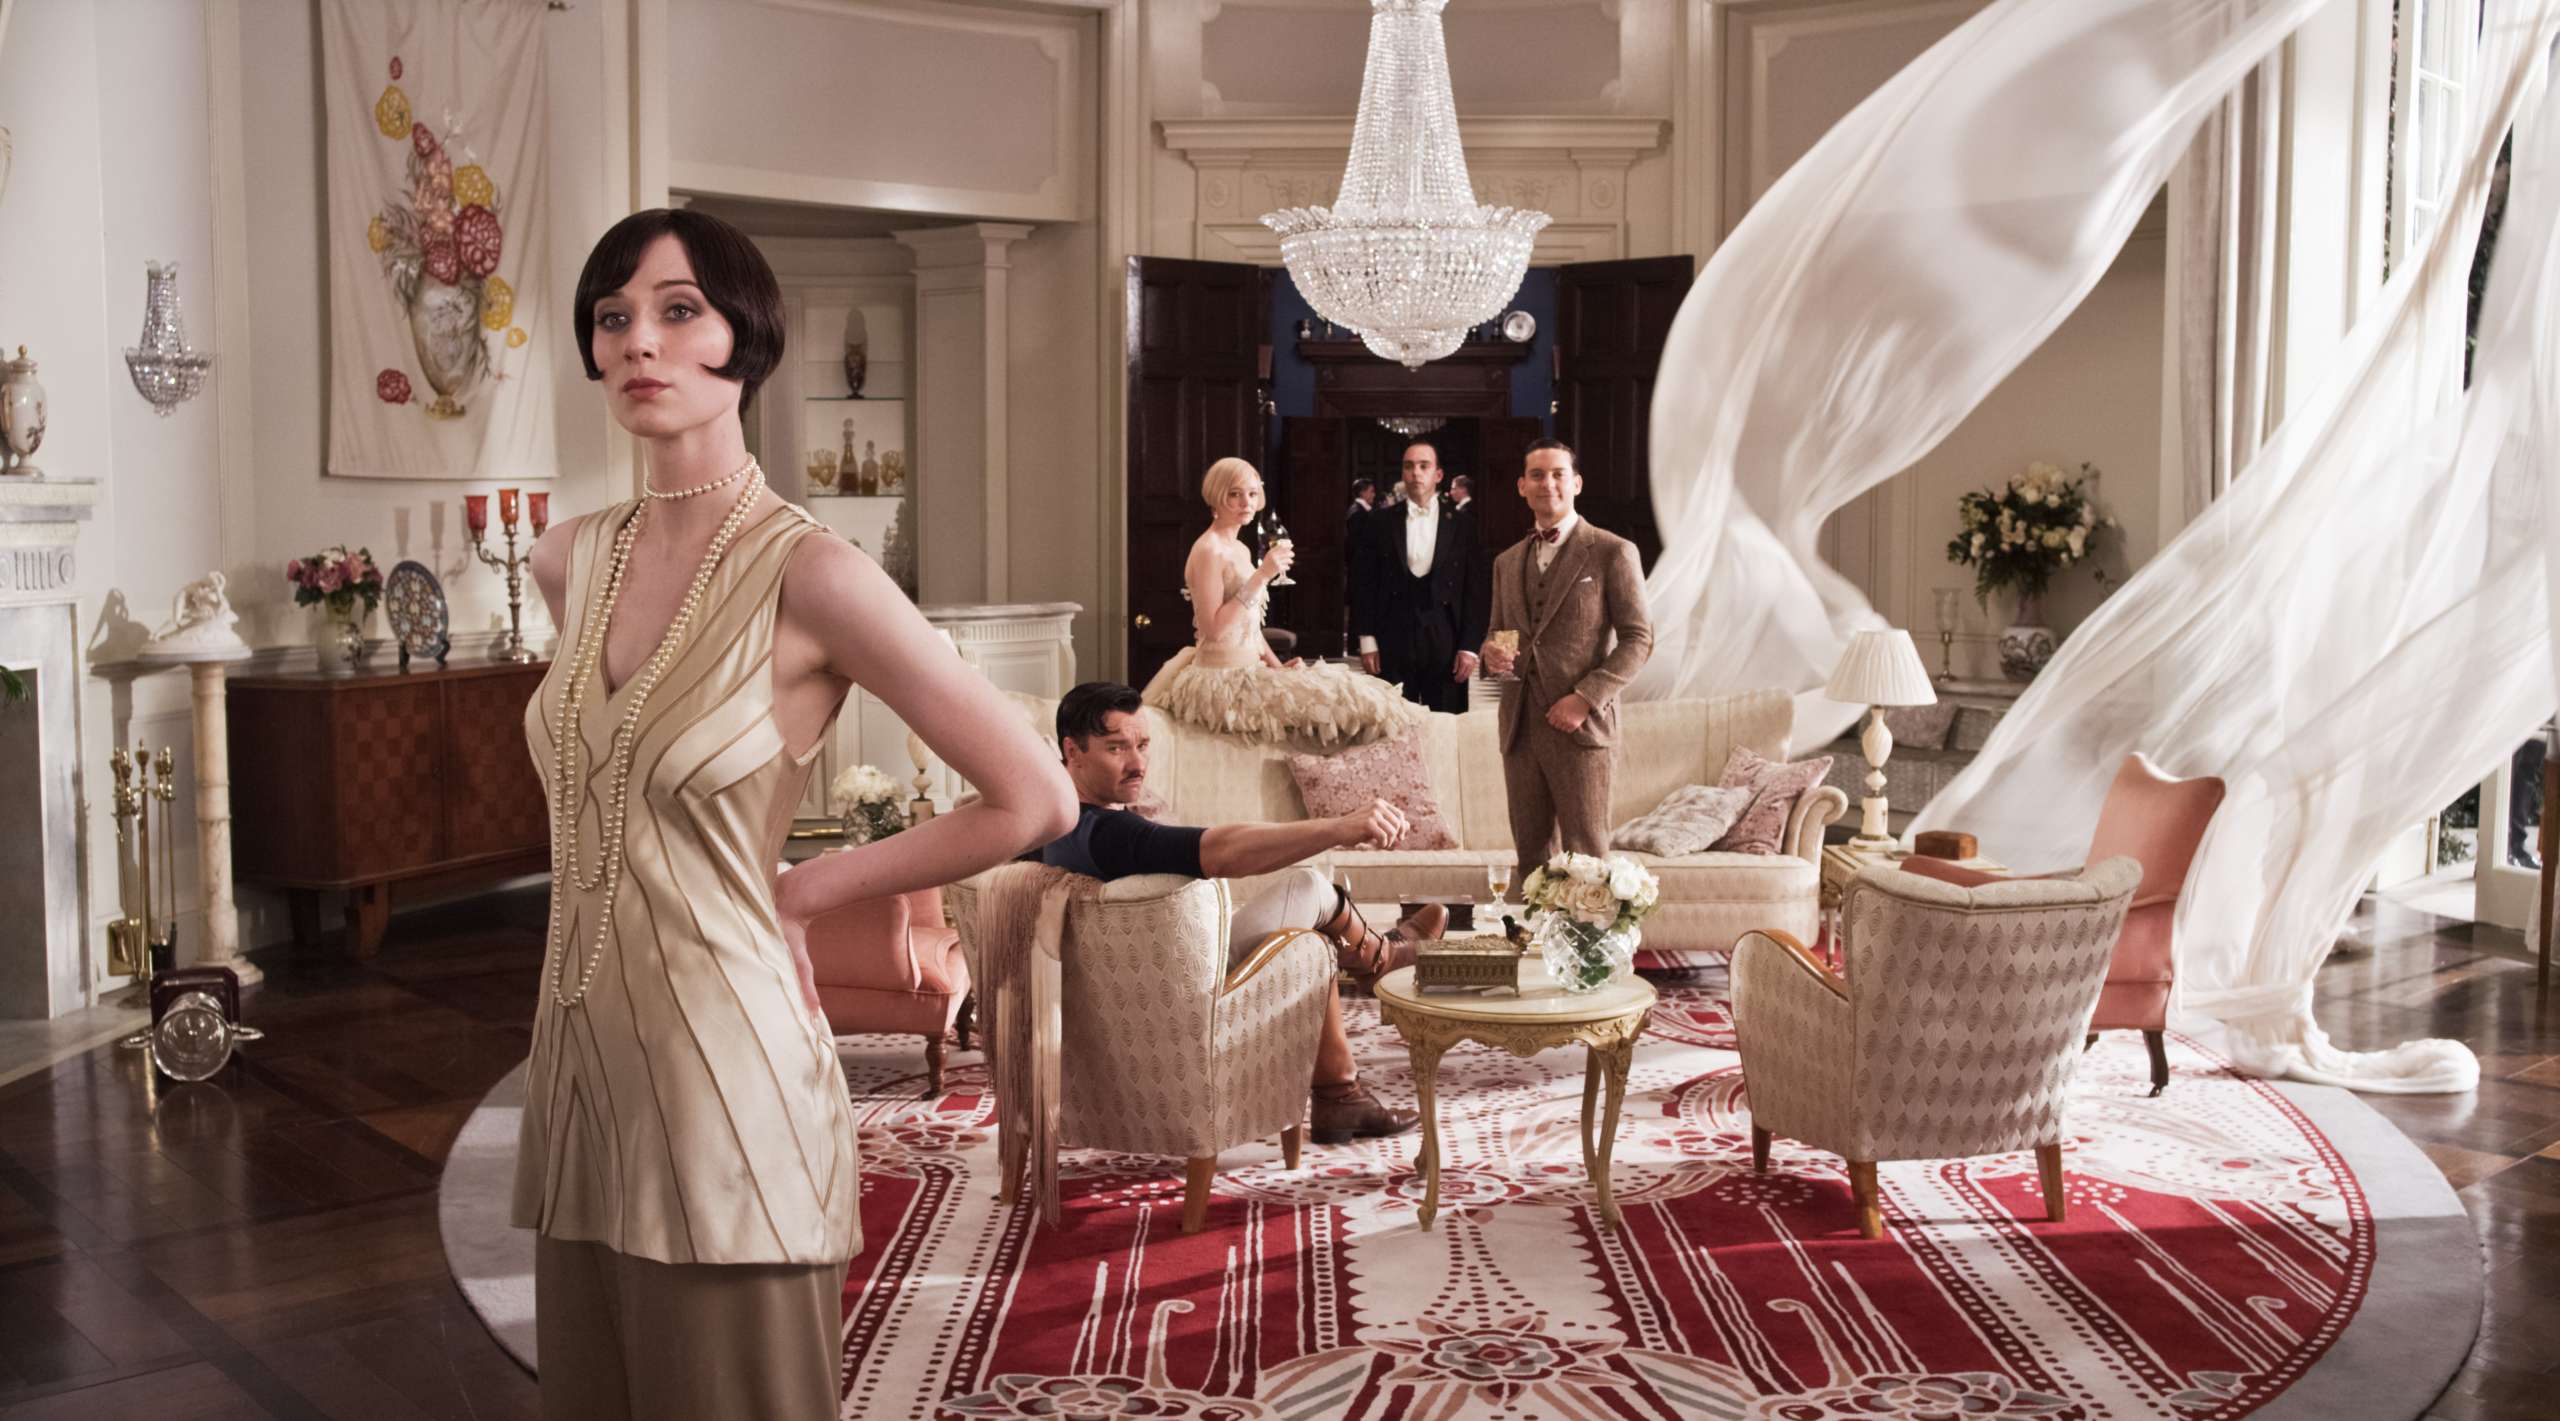 (L-r) ELIZABETH DEBICKI as Jordan Baker, JOEL EDGERTON as Tom Buchanan, CAREY MULLIGAN as Daisy Buchanan and TOBEY MAGUIRE as Nick Carraway in Warner Bros. Pictures’ and Village Roadshow Pictures’ drama “THE GREAT GATSBY,” a Warner Bros. Pictures release.